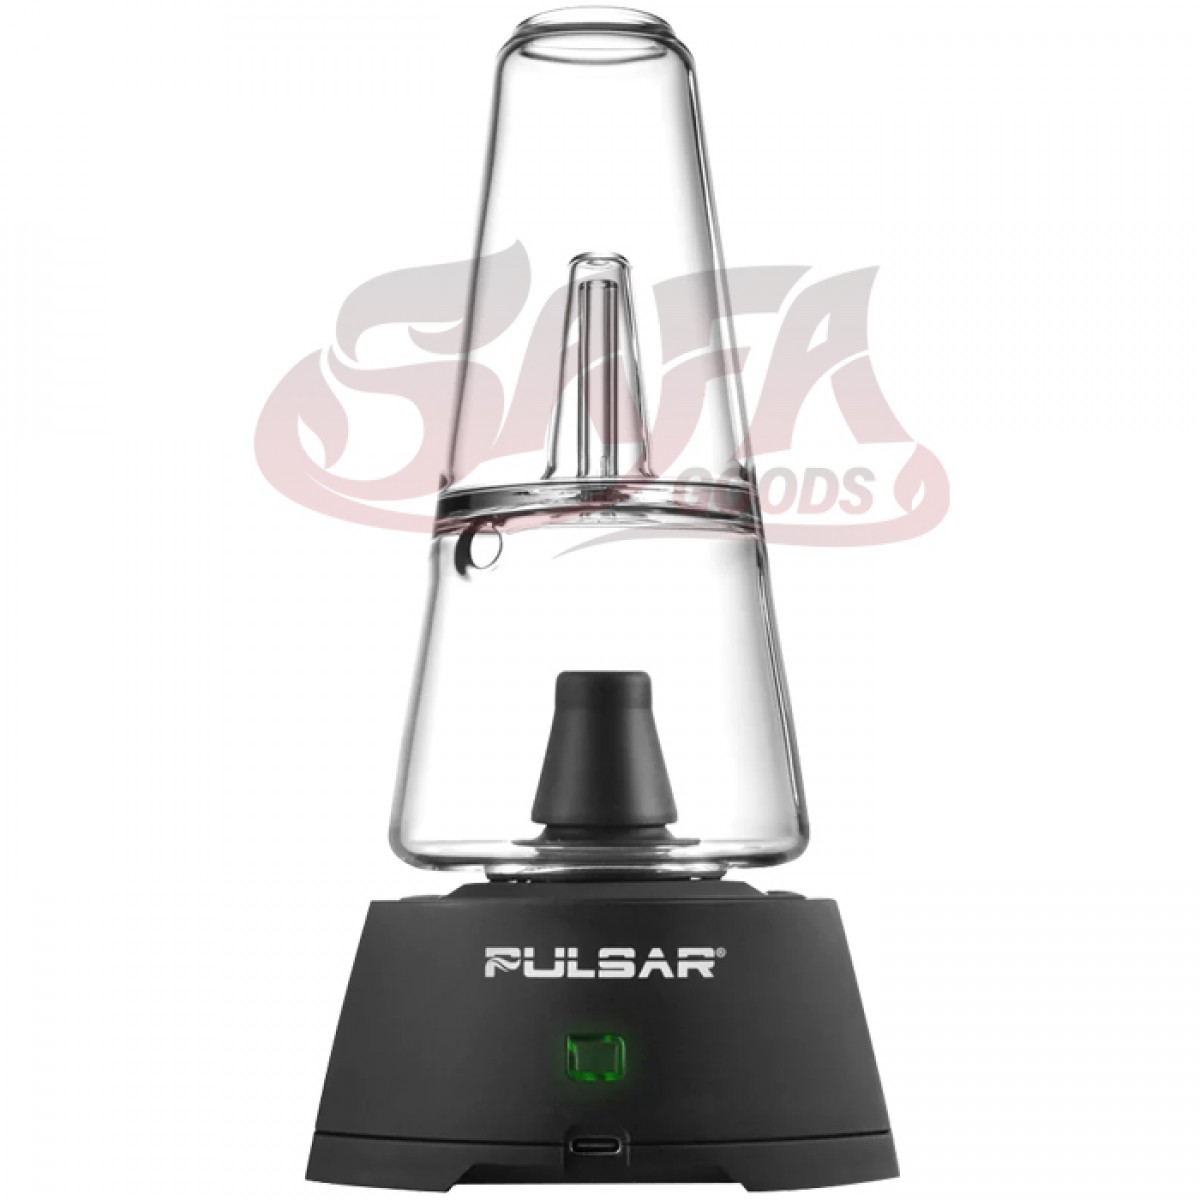 PULSAR Sipper Dual Use Concentrate or 510 Cartridge Vaporizer